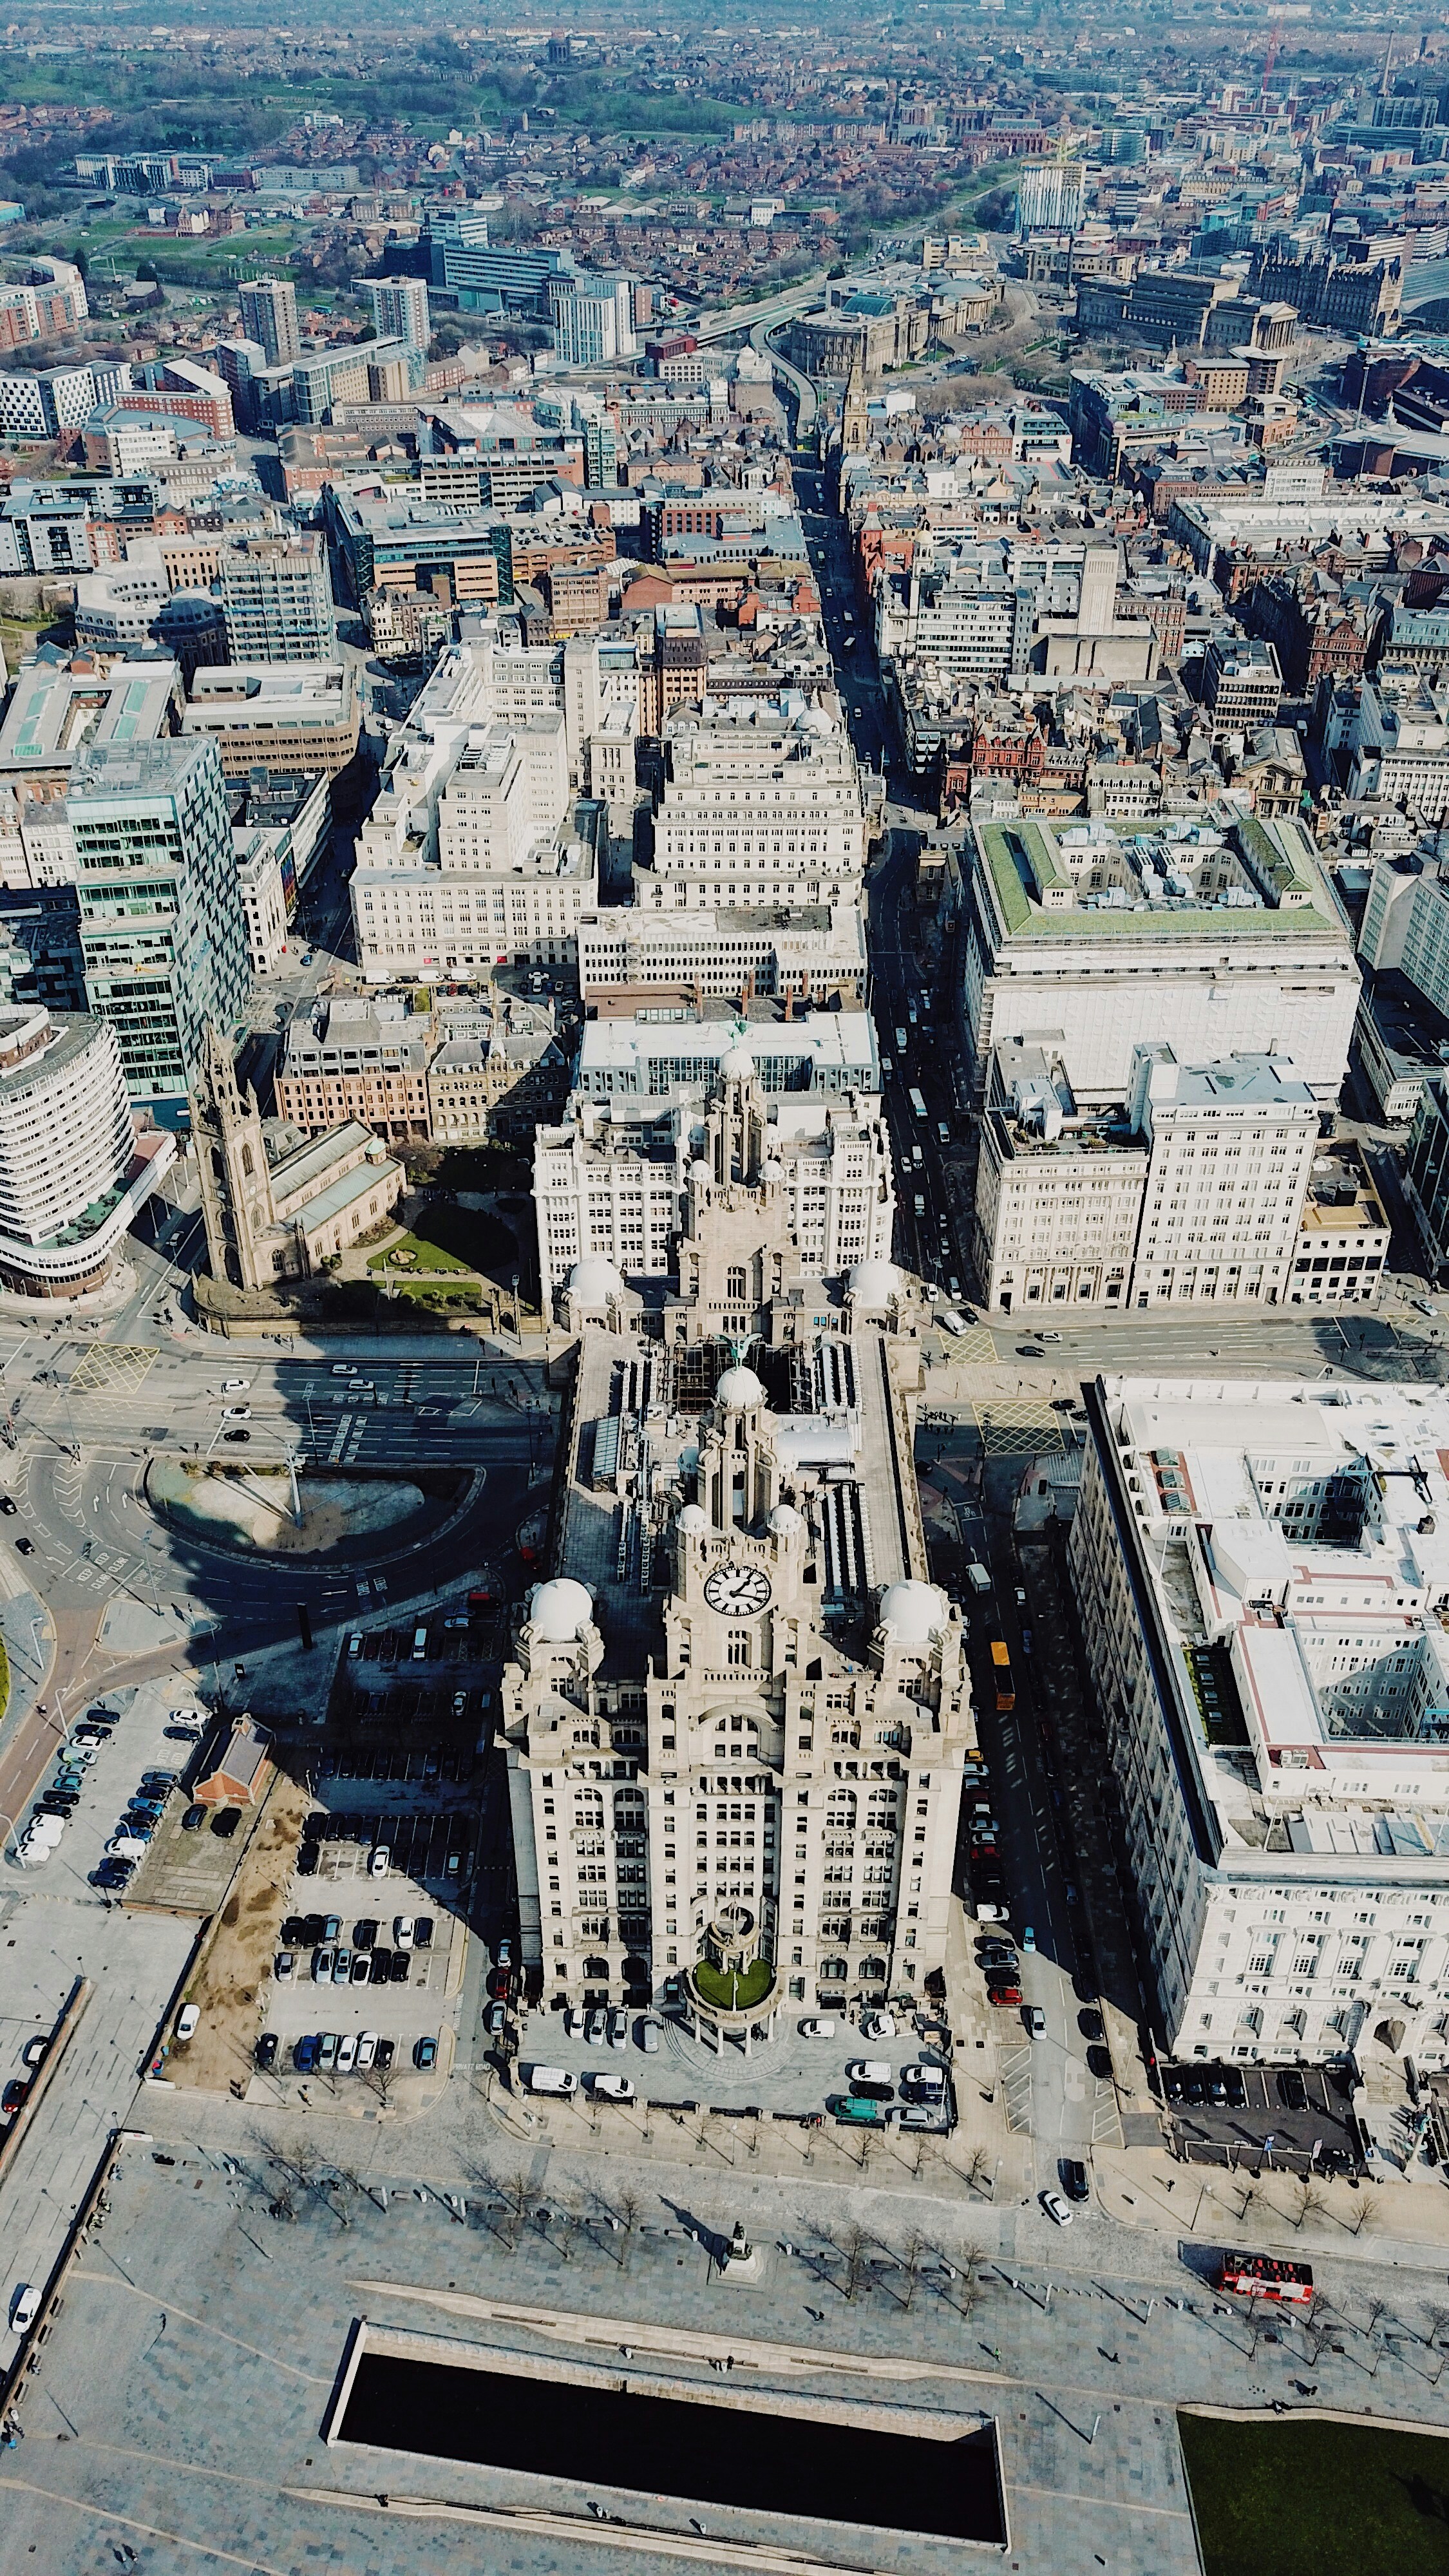 A drone photo of the Royal Liver Building in Liverpool, UK. Photo taken with a DJI Mavic Pro